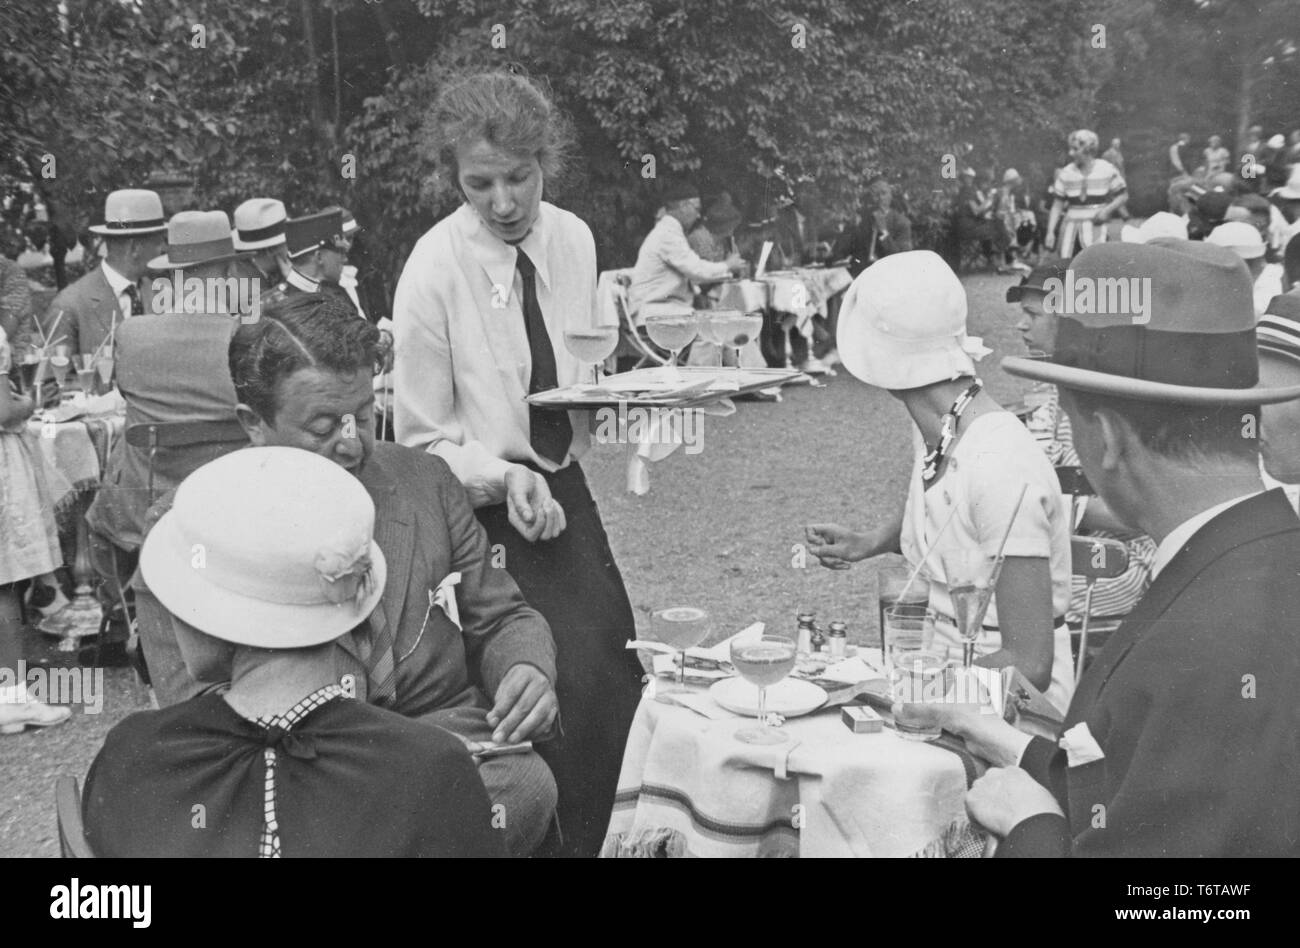 1930s open-air cafe. It's full of people eating and drinking. A female waitress is both serving drinks and receives payments from the customers. Sweden 1930s Stock Photo